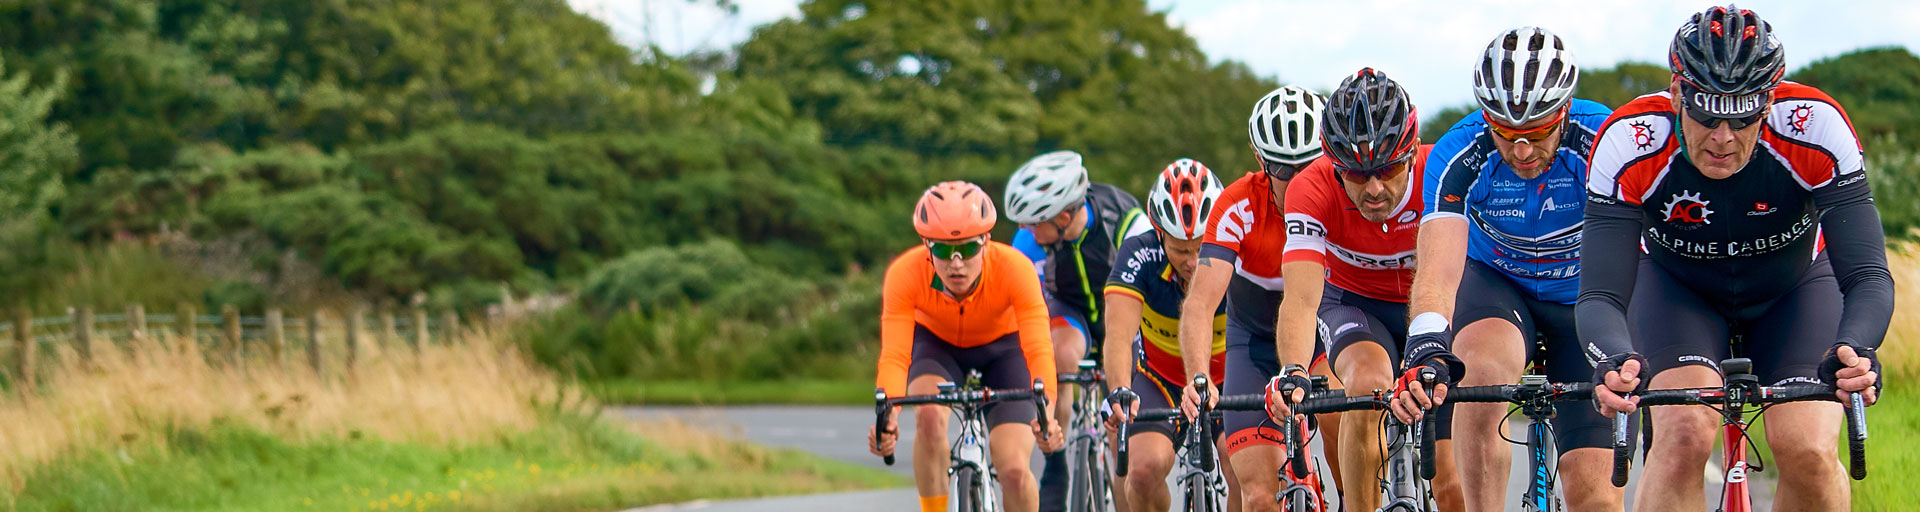 Cycling banner new